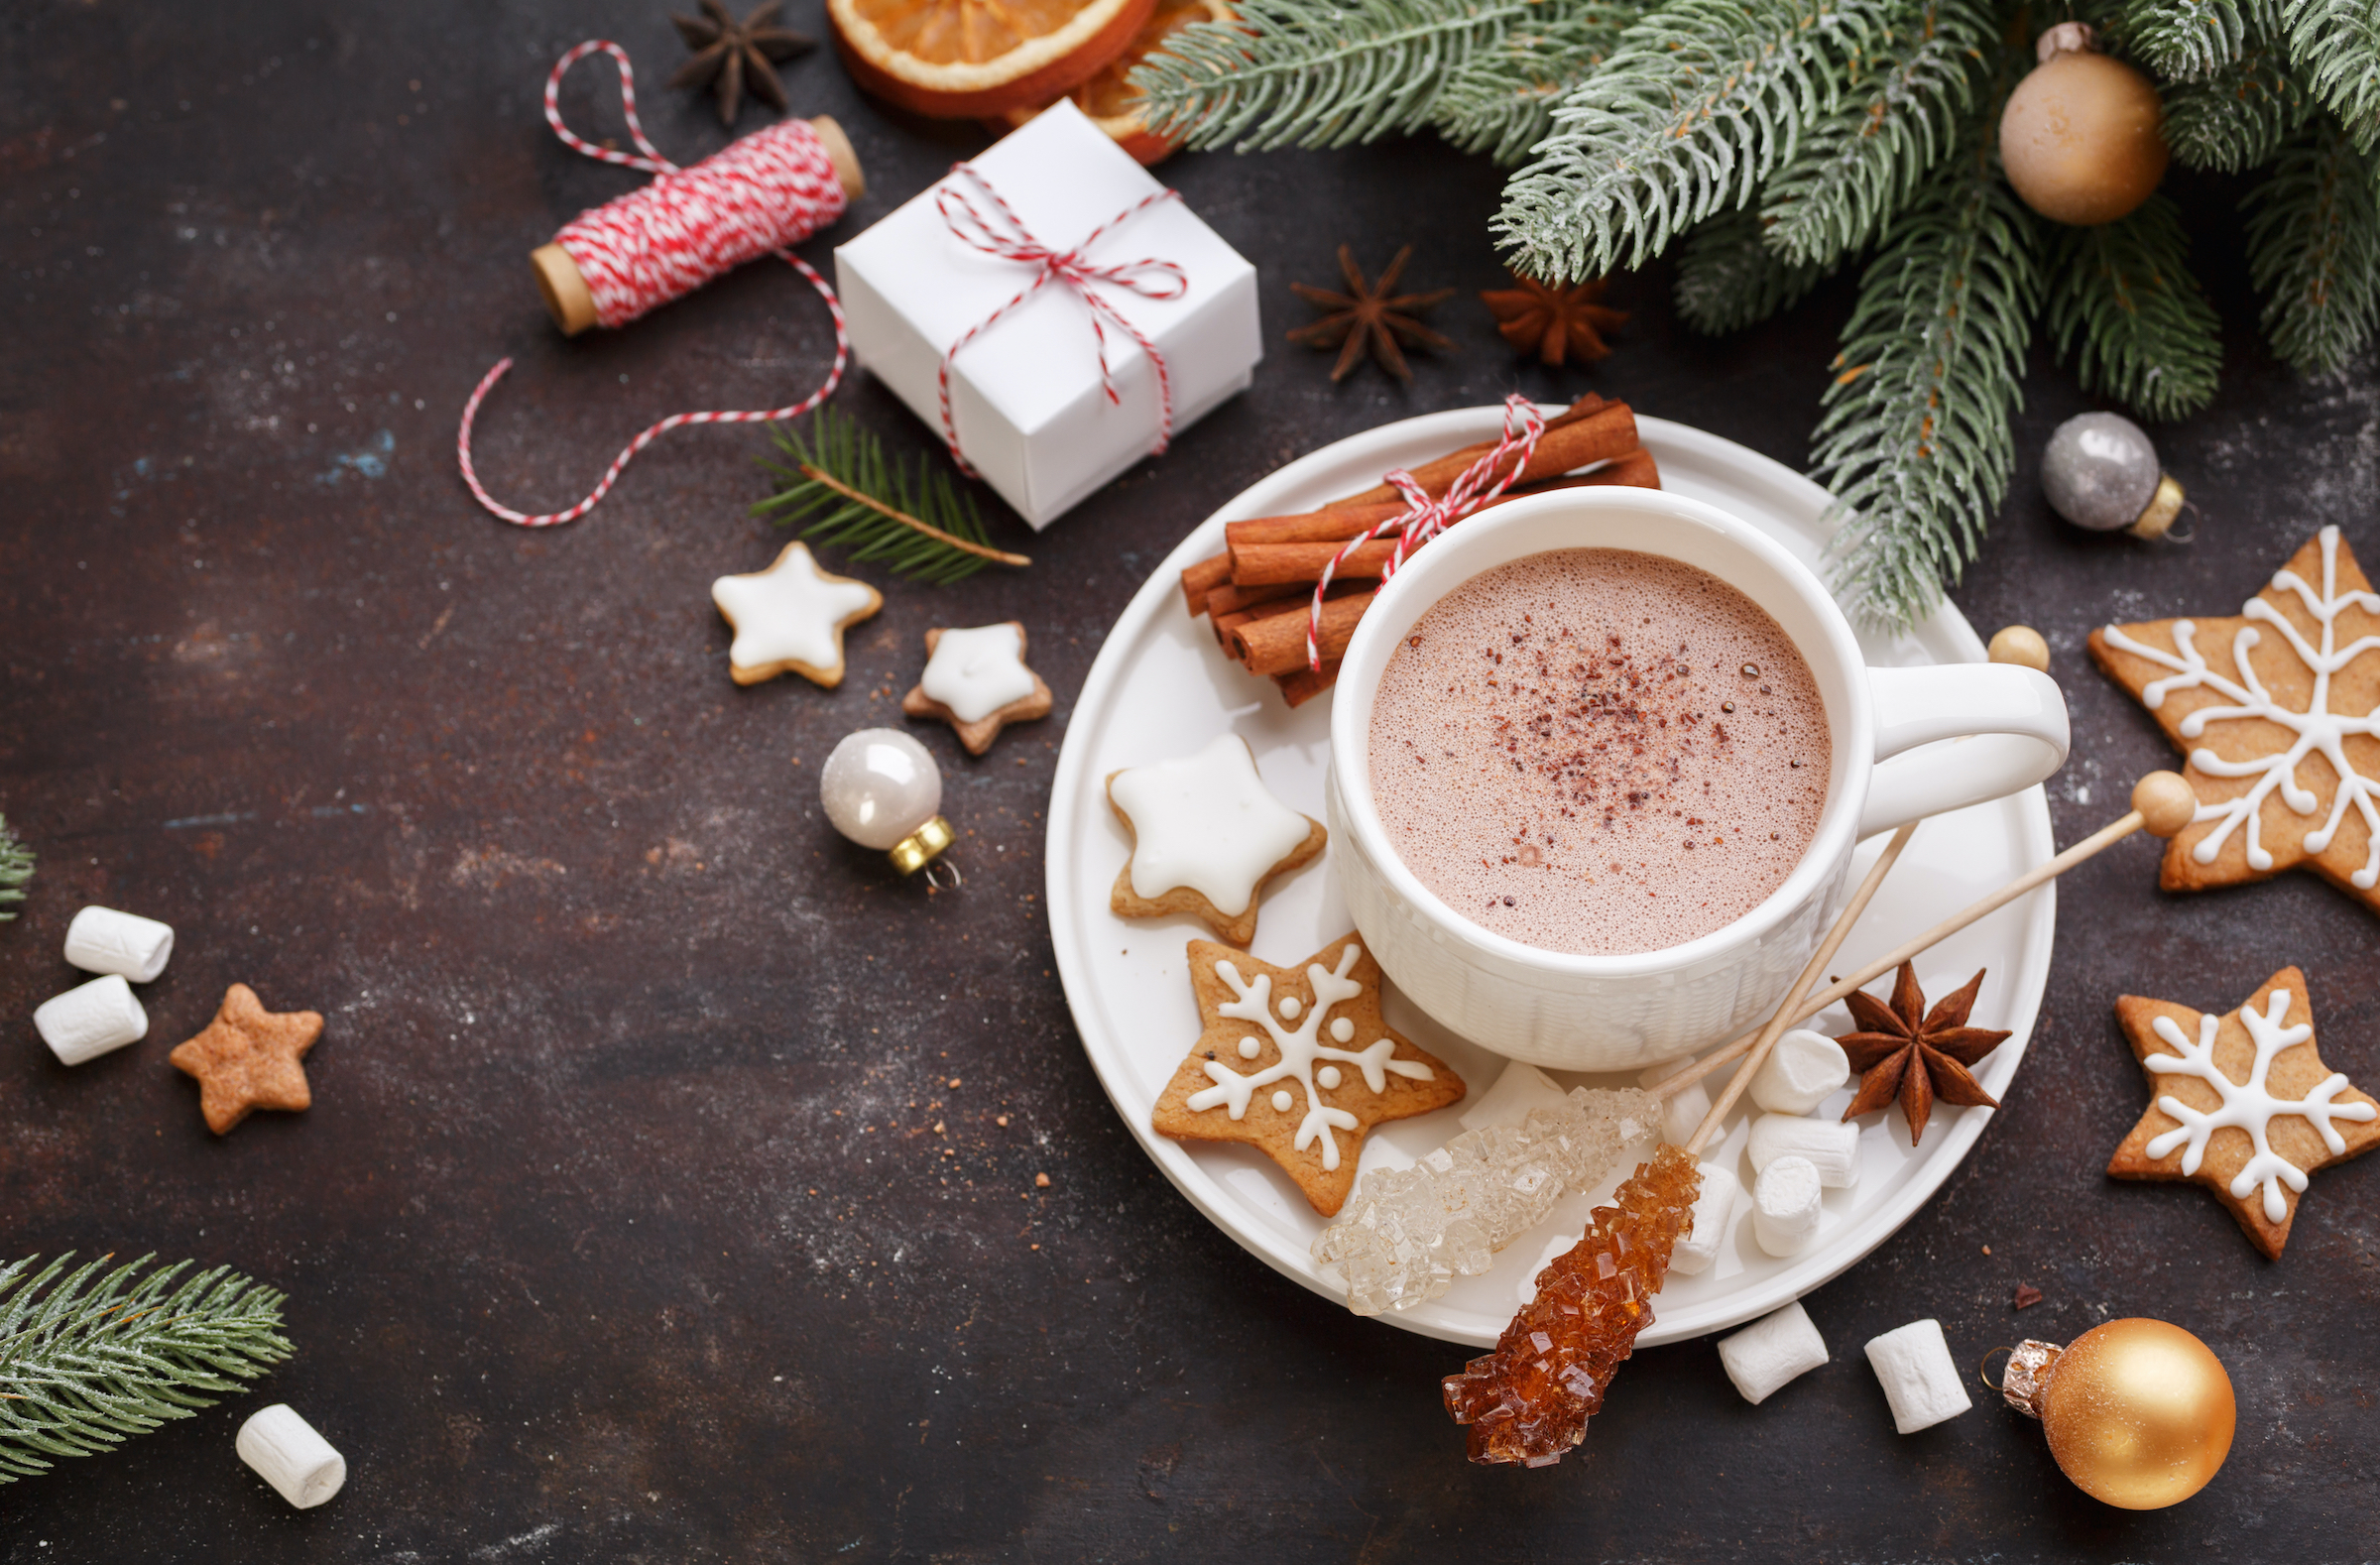 A cup of hot chocolate surrounded by Christmas decor and cookies